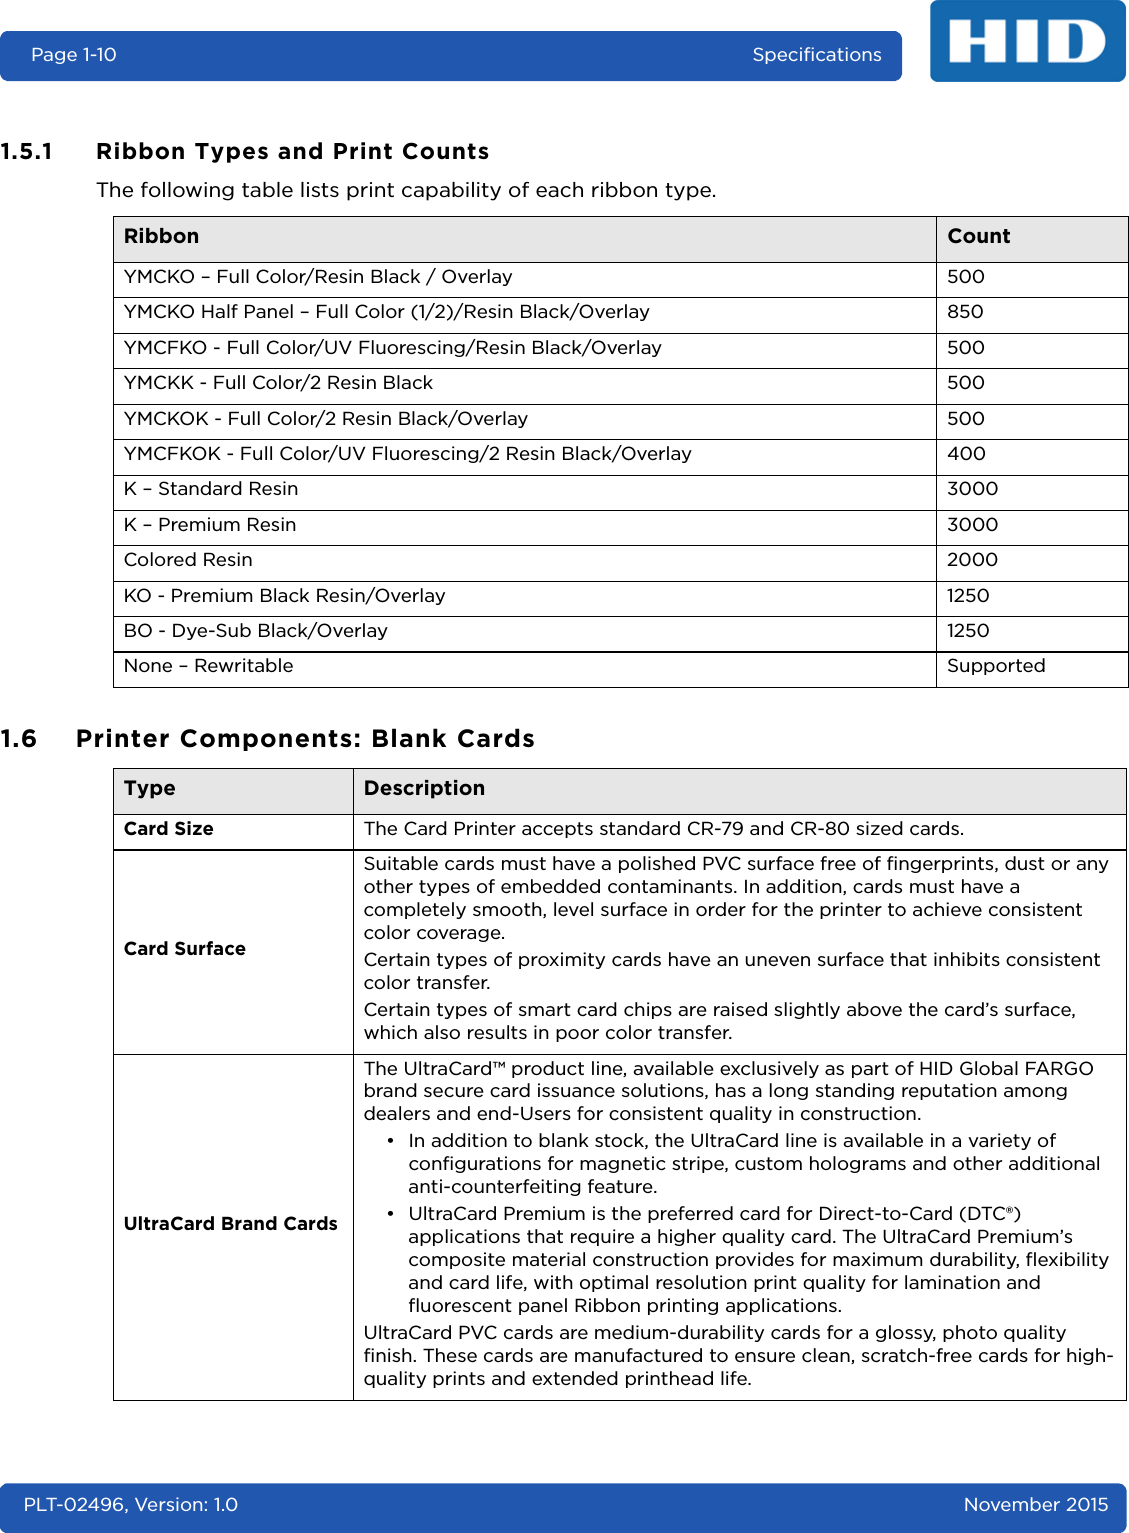 Page 1-10 SpecificationsPLT-02496, Version: 1.0 November 20151.5.1 Ribbon Types and Print CountsThe following table lists print capability of each ribbon type.1.6 Printer Components: Blank CardsRibbon CountYMCKO – Full Color/Resin Black / Overlay 500YMCKO Half Panel – Full Color (1/2)/Resin Black/Overlay 850YMCFKO - Full Color/UV Fluorescing/Resin Black/Overlay 500YMCKK - Full Color/2 Resin Black 500YMCKOK - Full Color/2 Resin Black/Overlay 500YMCFKOK - Full Color/UV Fluorescing/2 Resin Black/Overlay 400K – Standard Resin 3000K – Premium Resin 3000Colored Resin 2000KO - Premium Black Resin/Overlay 1250BO - Dye-Sub Black/Overlay 1250None – Rewritable SupportedType DescriptionCard Size The Card Printer accepts standard CR-79 and CR-80 sized cards.Card SurfaceSuitable cards must have a polished PVC surface free of fingerprints, dust or any other types of embedded contaminants. In addition, cards must have a completely smooth, level surface in order for the printer to achieve consistent color coverage.Certain types of proximity cards have an uneven surface that inhibits consistent color transfer.Certain types of smart card chips are raised slightly above the card’s surface, which also results in poor color transfer.UltraCard Brand CardsThe UltraCard™ product line, available exclusively as part of HID Global FARGO brand secure card issuance solutions, has a long standing reputation among dealers and end-Users for consistent quality in construction.• In addition to blank stock, the UltraCard line is available in a variety of configurations for magnetic stripe, custom holograms and other additional anti-counterfeiting feature.• UltraCard Premium is the preferred card for Direct-to-Card (DTC®) applications that require a higher quality card. The UltraCard Premium’s composite material construction provides for maximum durability, flexibility and card life, with optimal resolution print quality for lamination and fluorescent panel Ribbon printing applications.UltraCard PVC cards are medium-durability cards for a glossy, photo quality finish. These cards are manufactured to ensure clean, scratch-free cards for high-quality prints and extended printhead life.